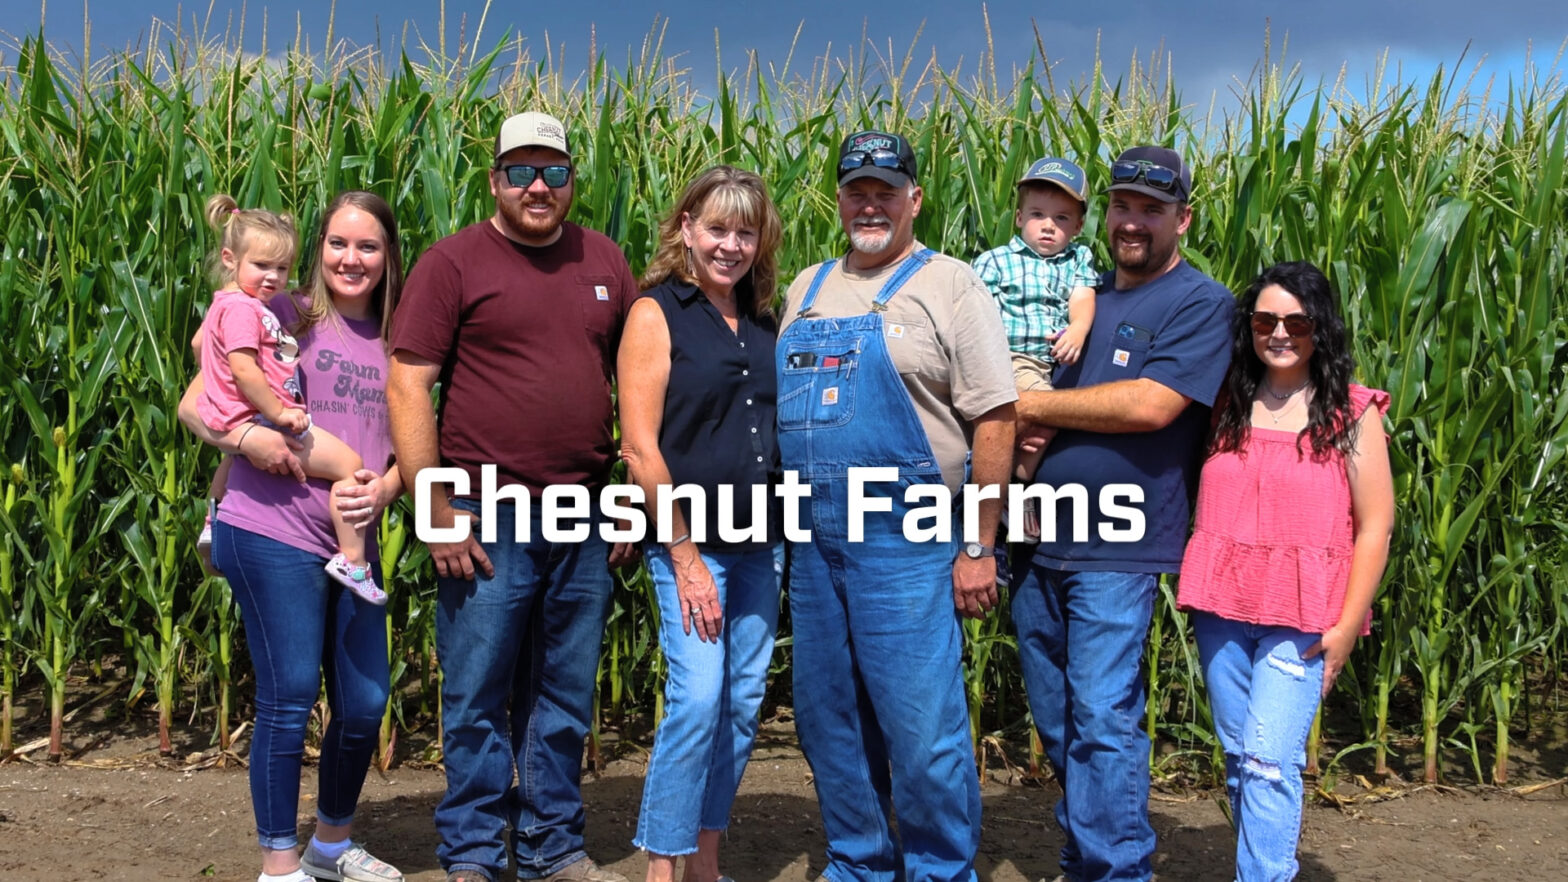 The Legacy of Chesnut Farms: A Century of Family, Farming and Growth